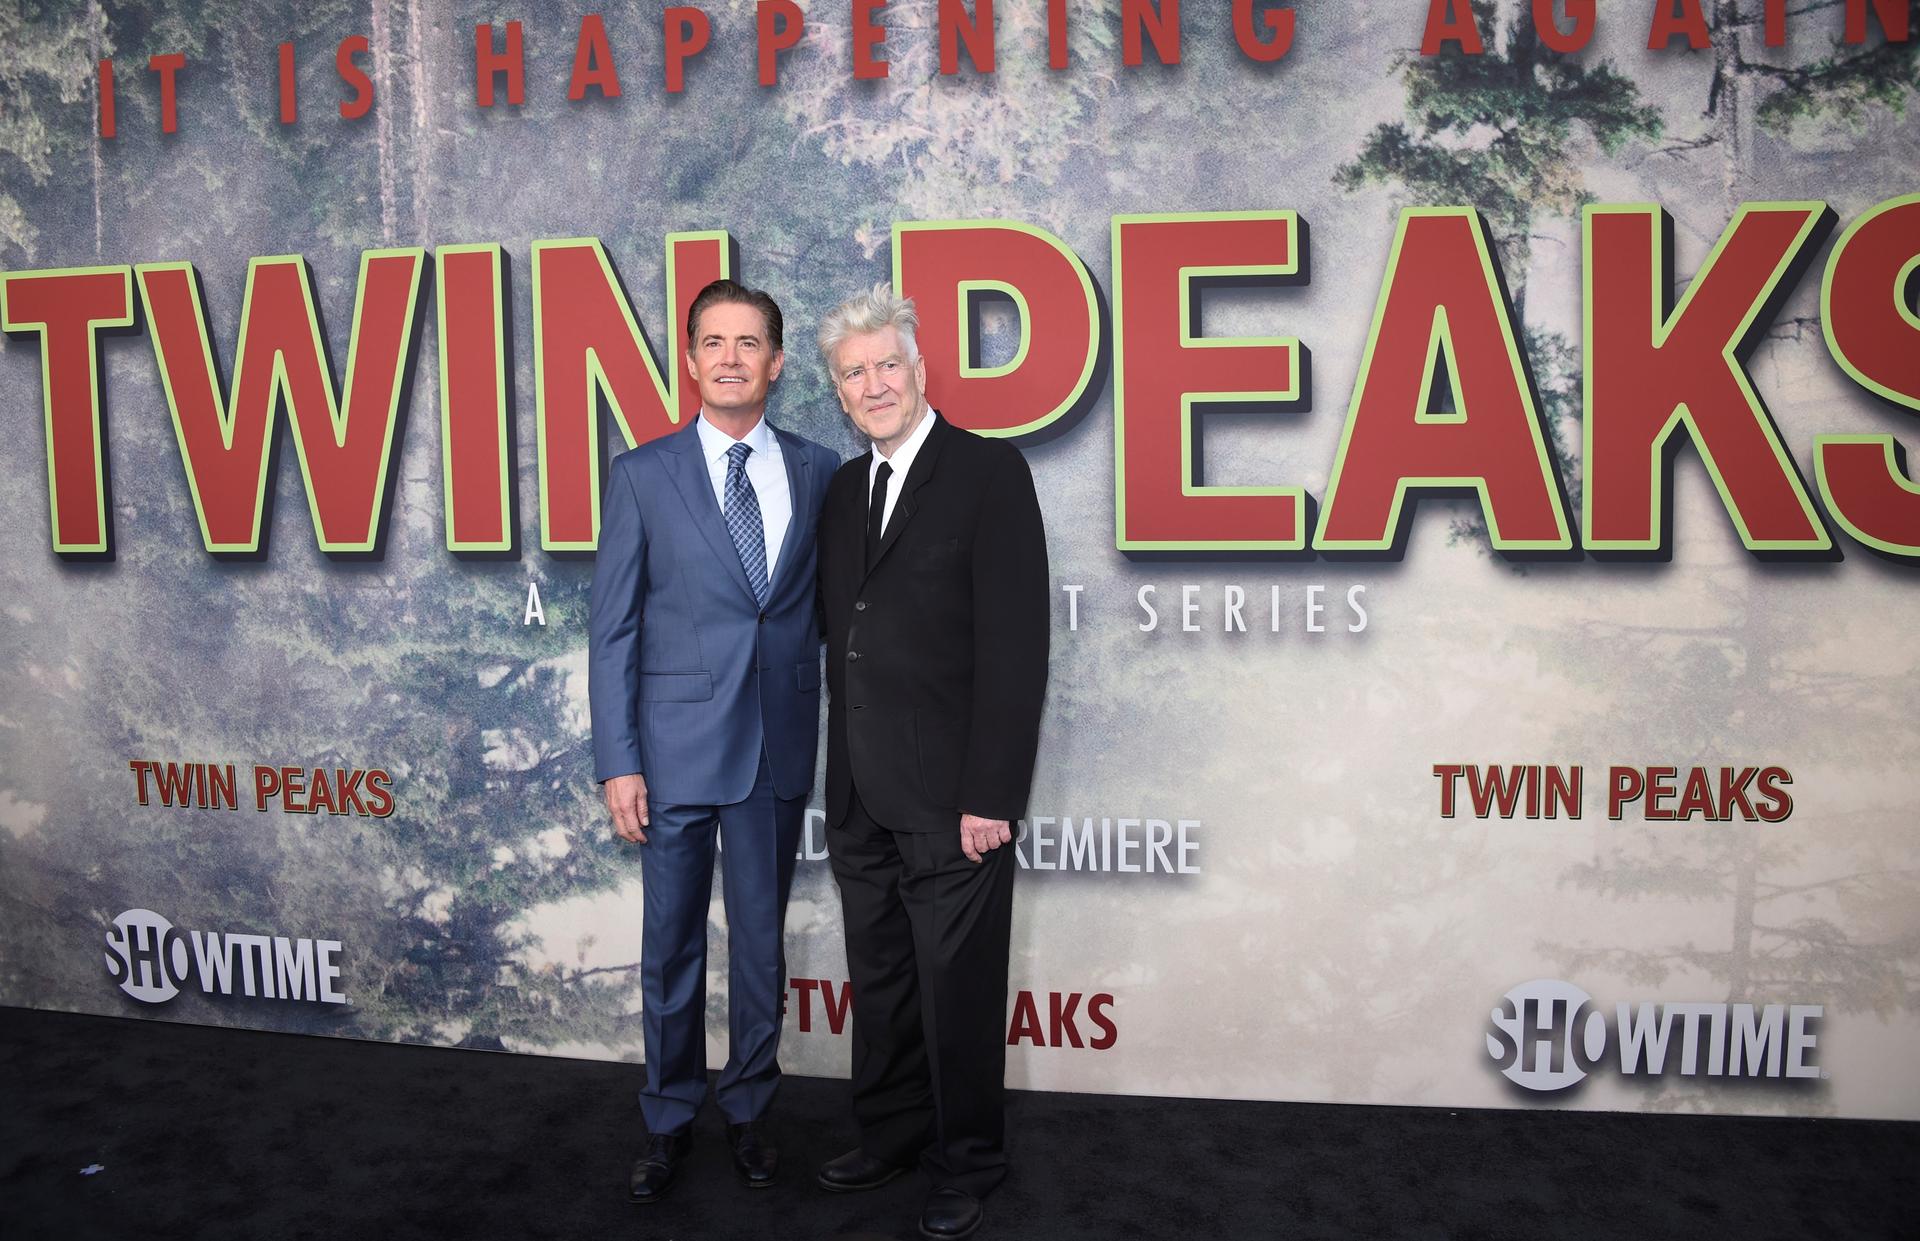 Kyle MacLachlan, left, and David Lynch attend the premiere of "Twin Peaks" in Los Angeles, May 19, 2017.